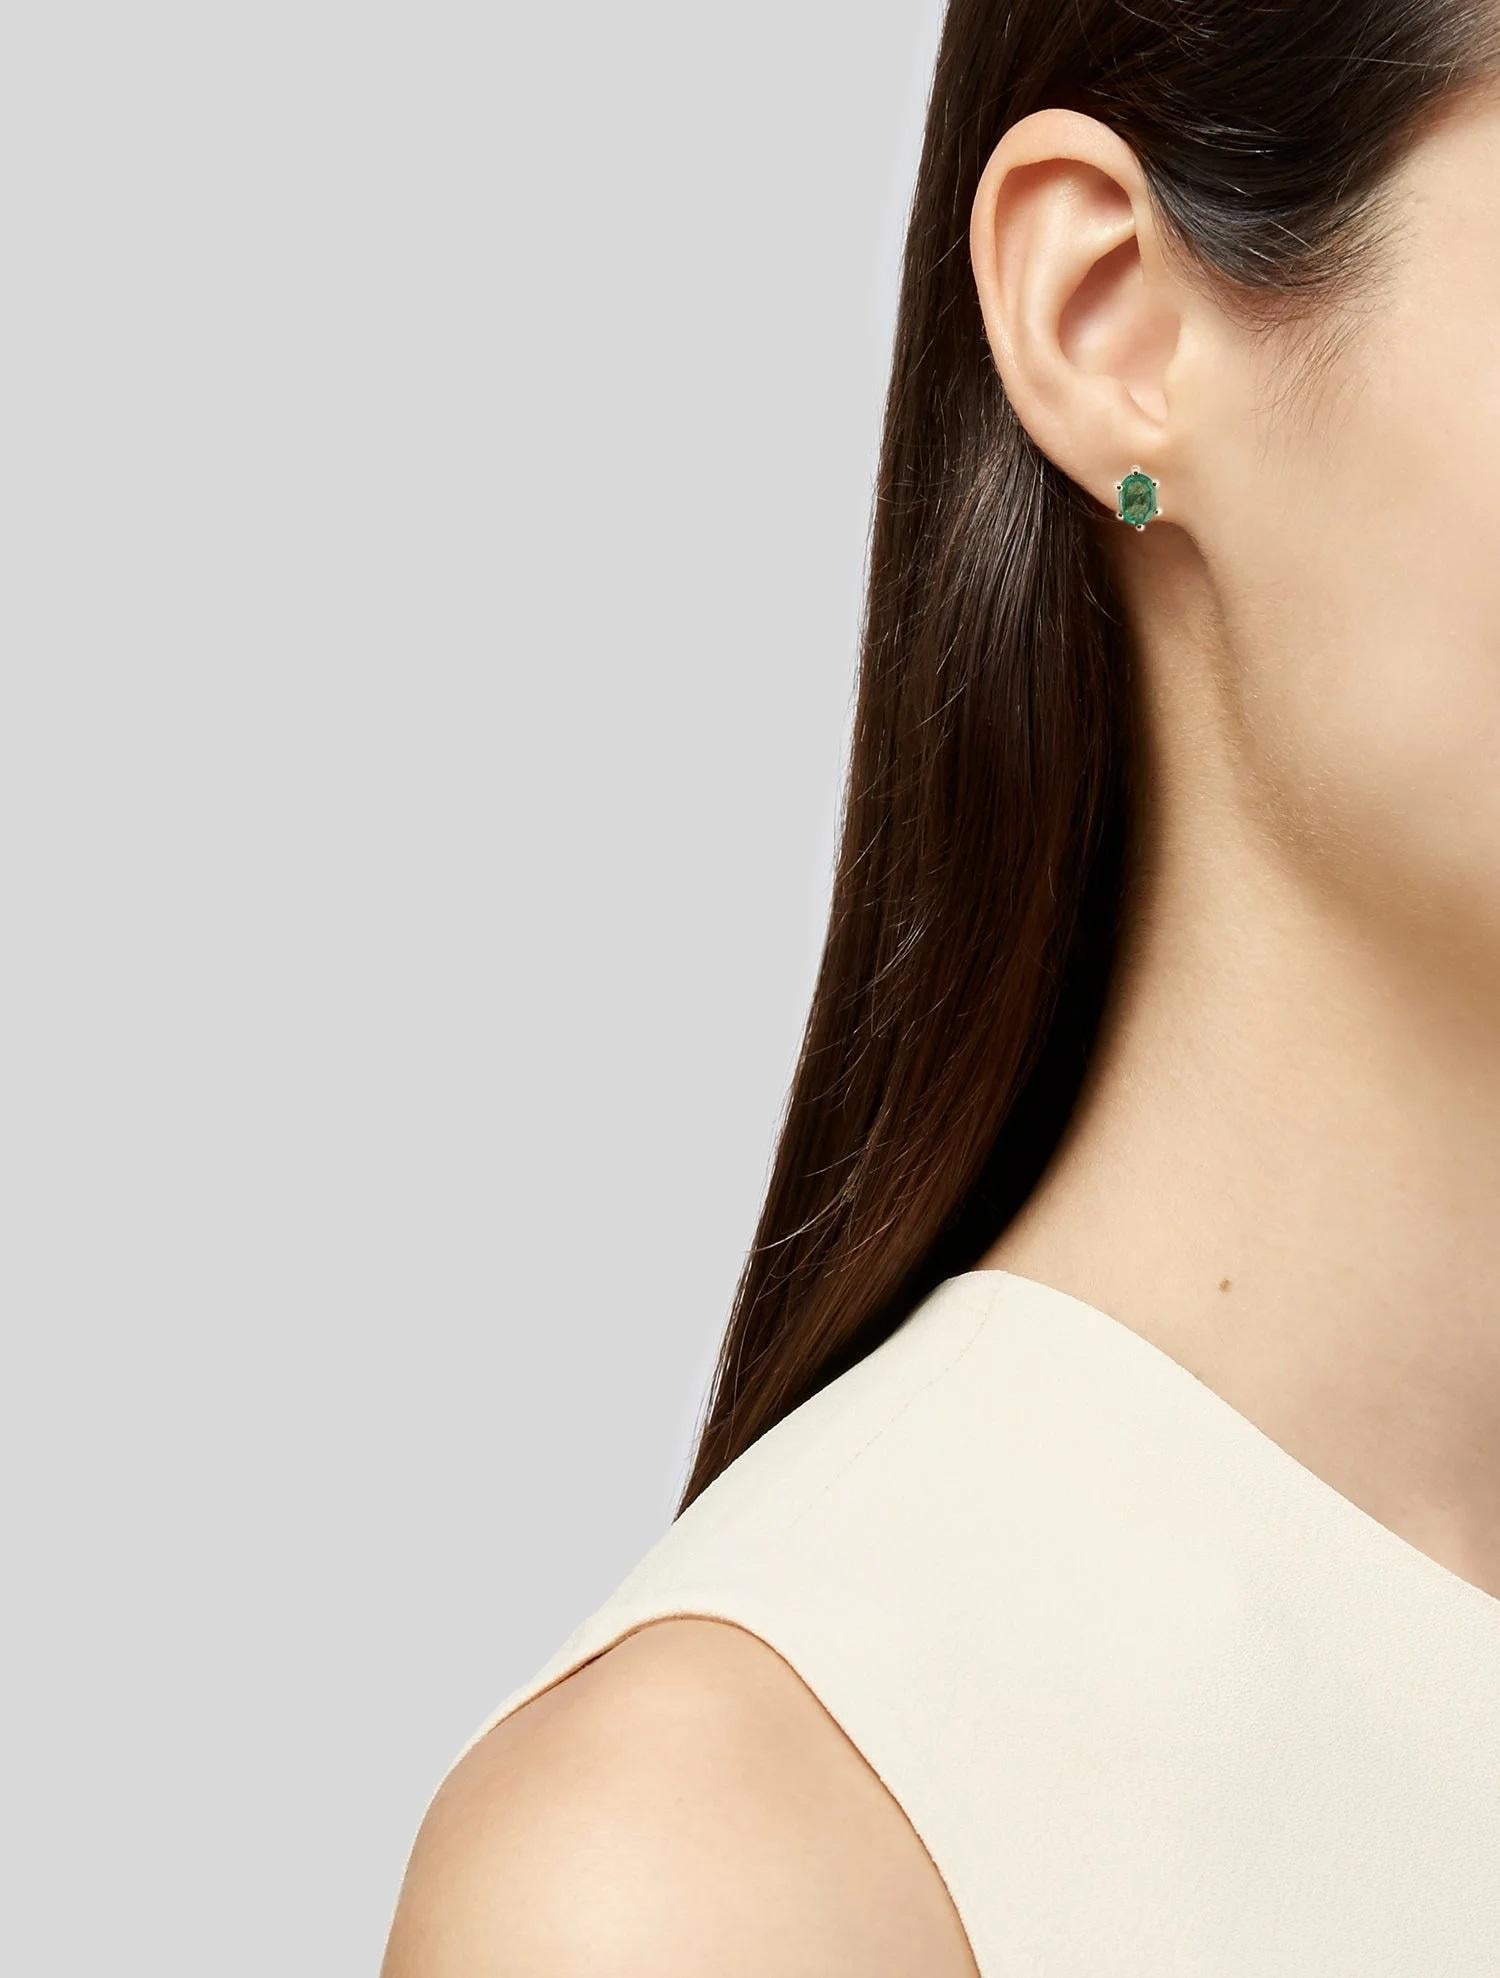 Add a touch of sophistication to your ensemble with these exquisite 14K Yellow Gold Emerald Stud Earrings. Each earring features a captivating oval modified brilliant emerald, boasting a rich green hue with a moderately strong saturation. Crafted